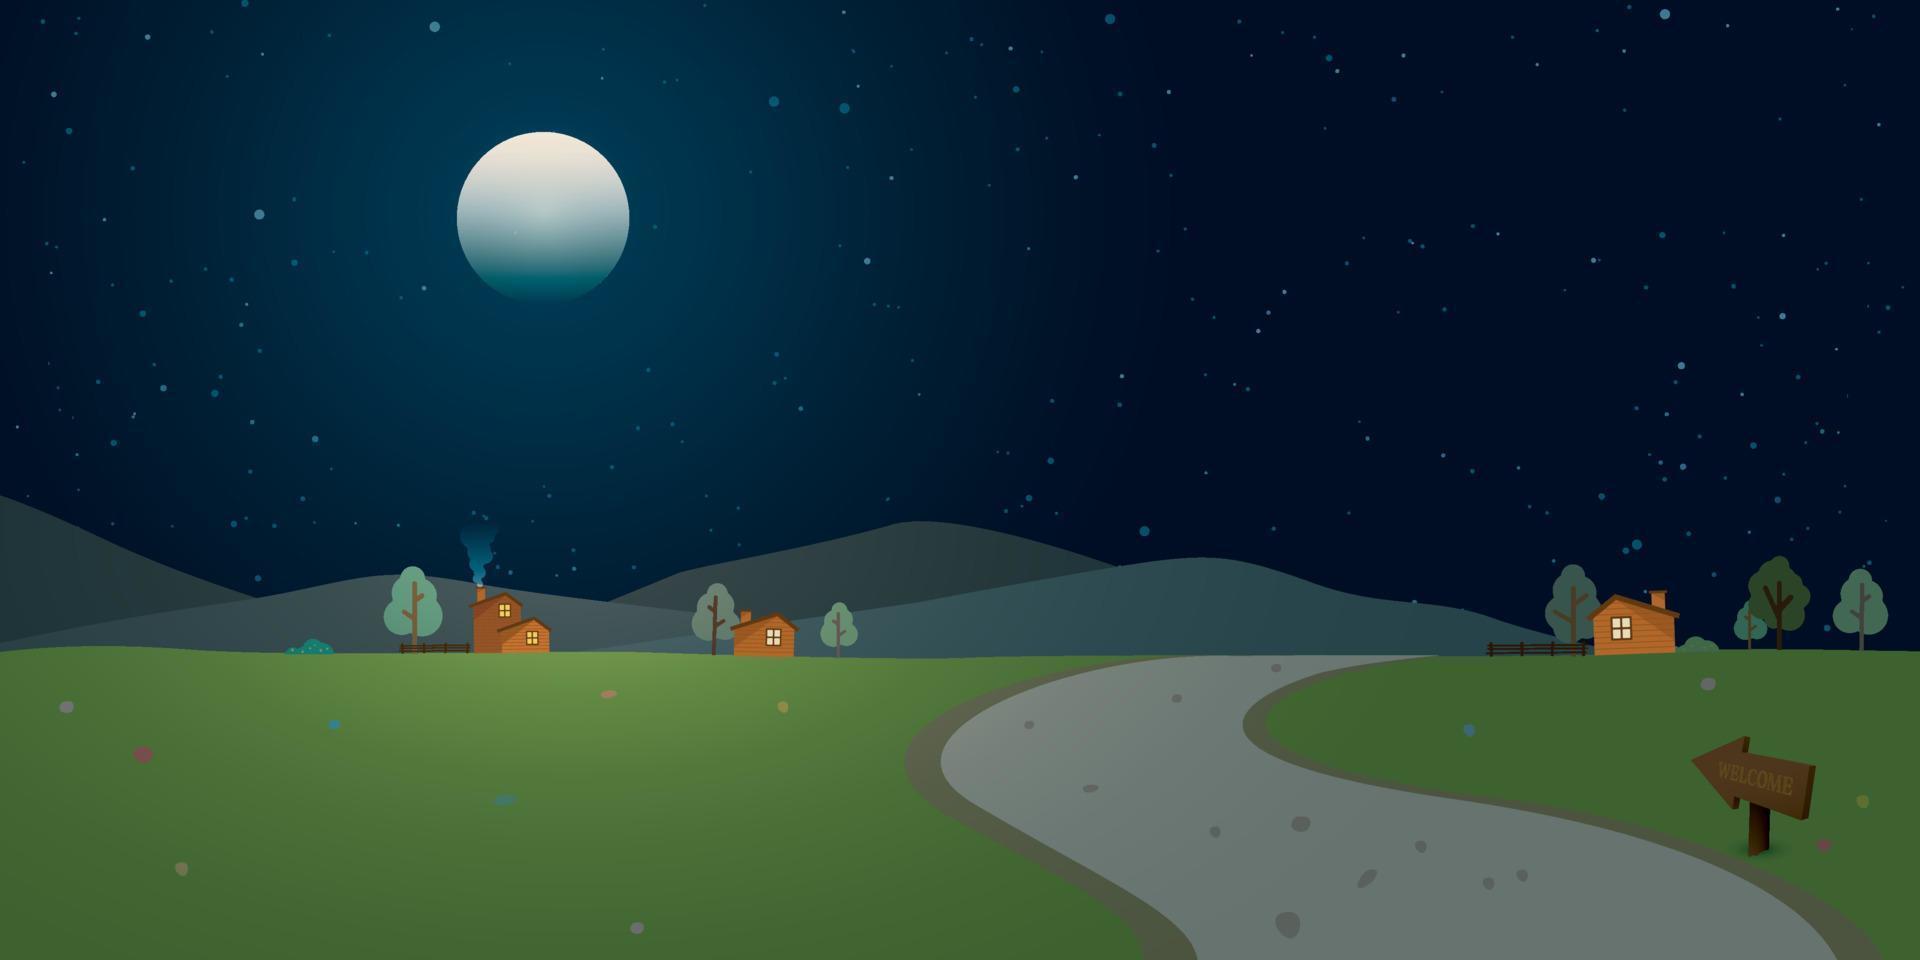 Local road through the village to hills at countryside landscape at night with fullmoon and a lot of stars in the sky vector illustration.